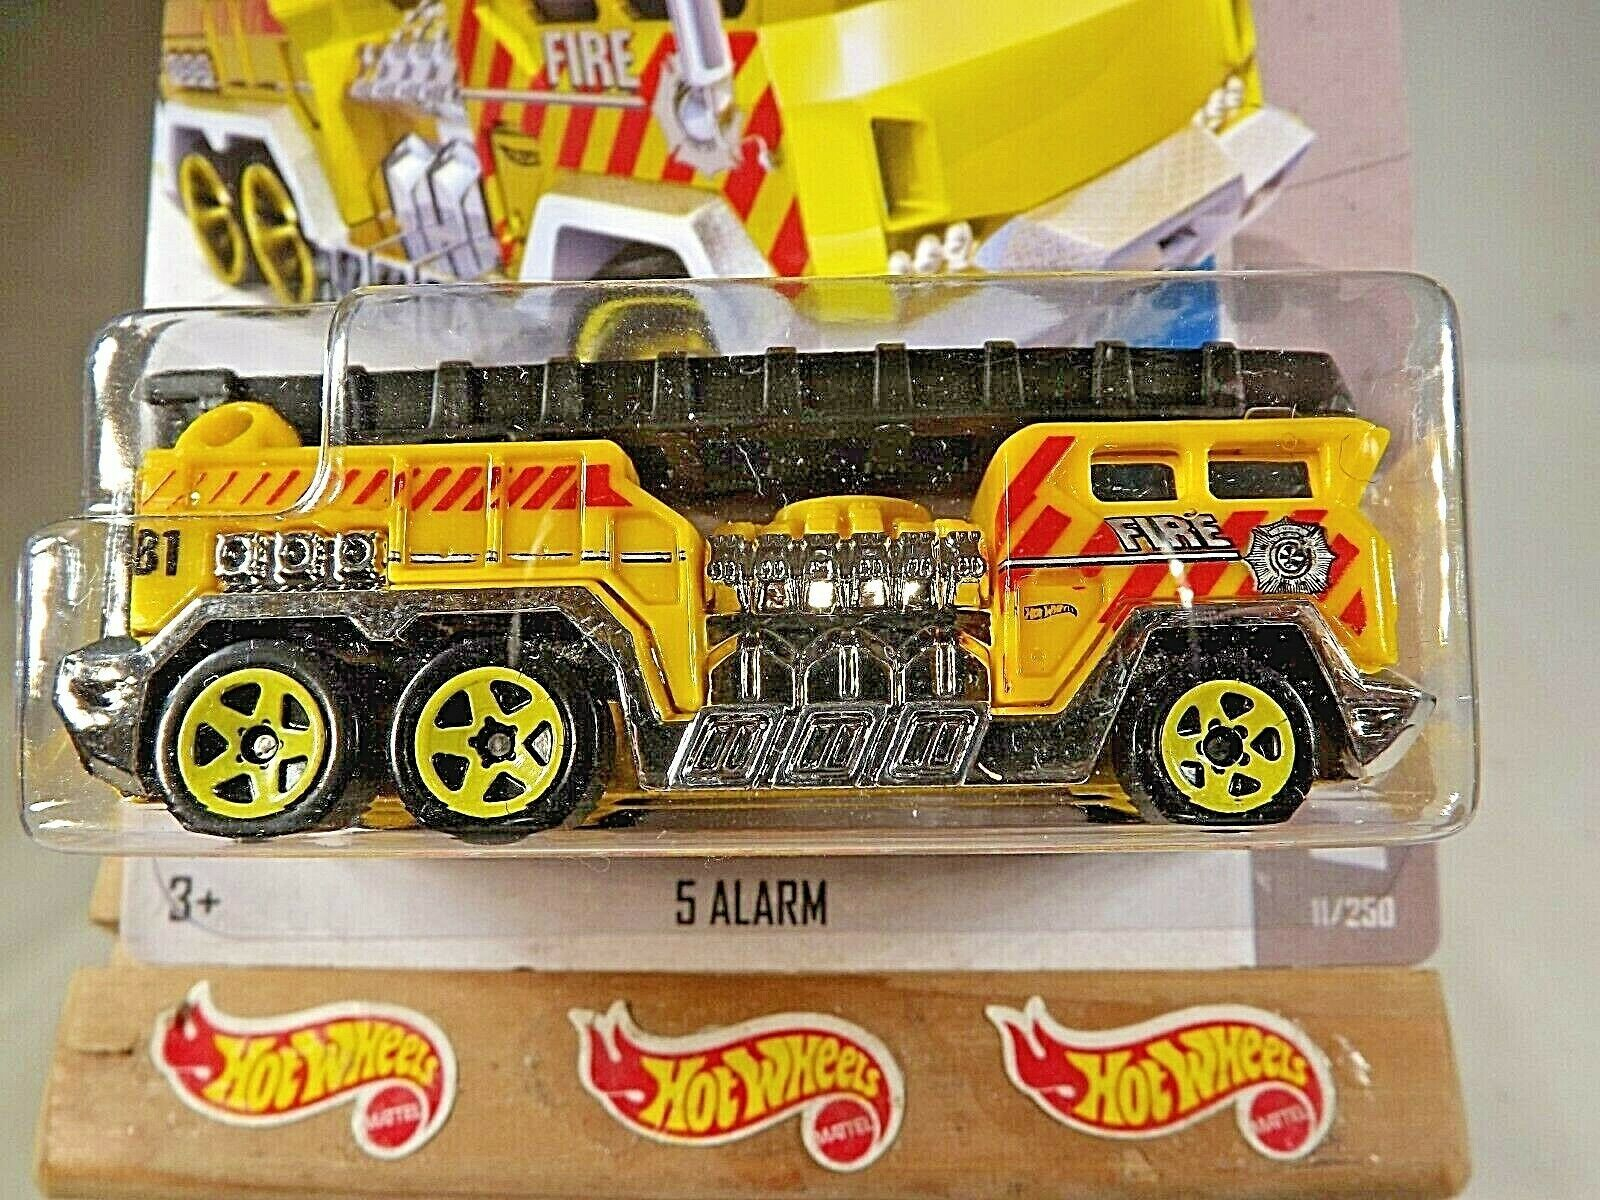 2013 Hot Wheels #11 Hw City-Rescue 5 Alarm Fire Engine tout Hw Fire And Security